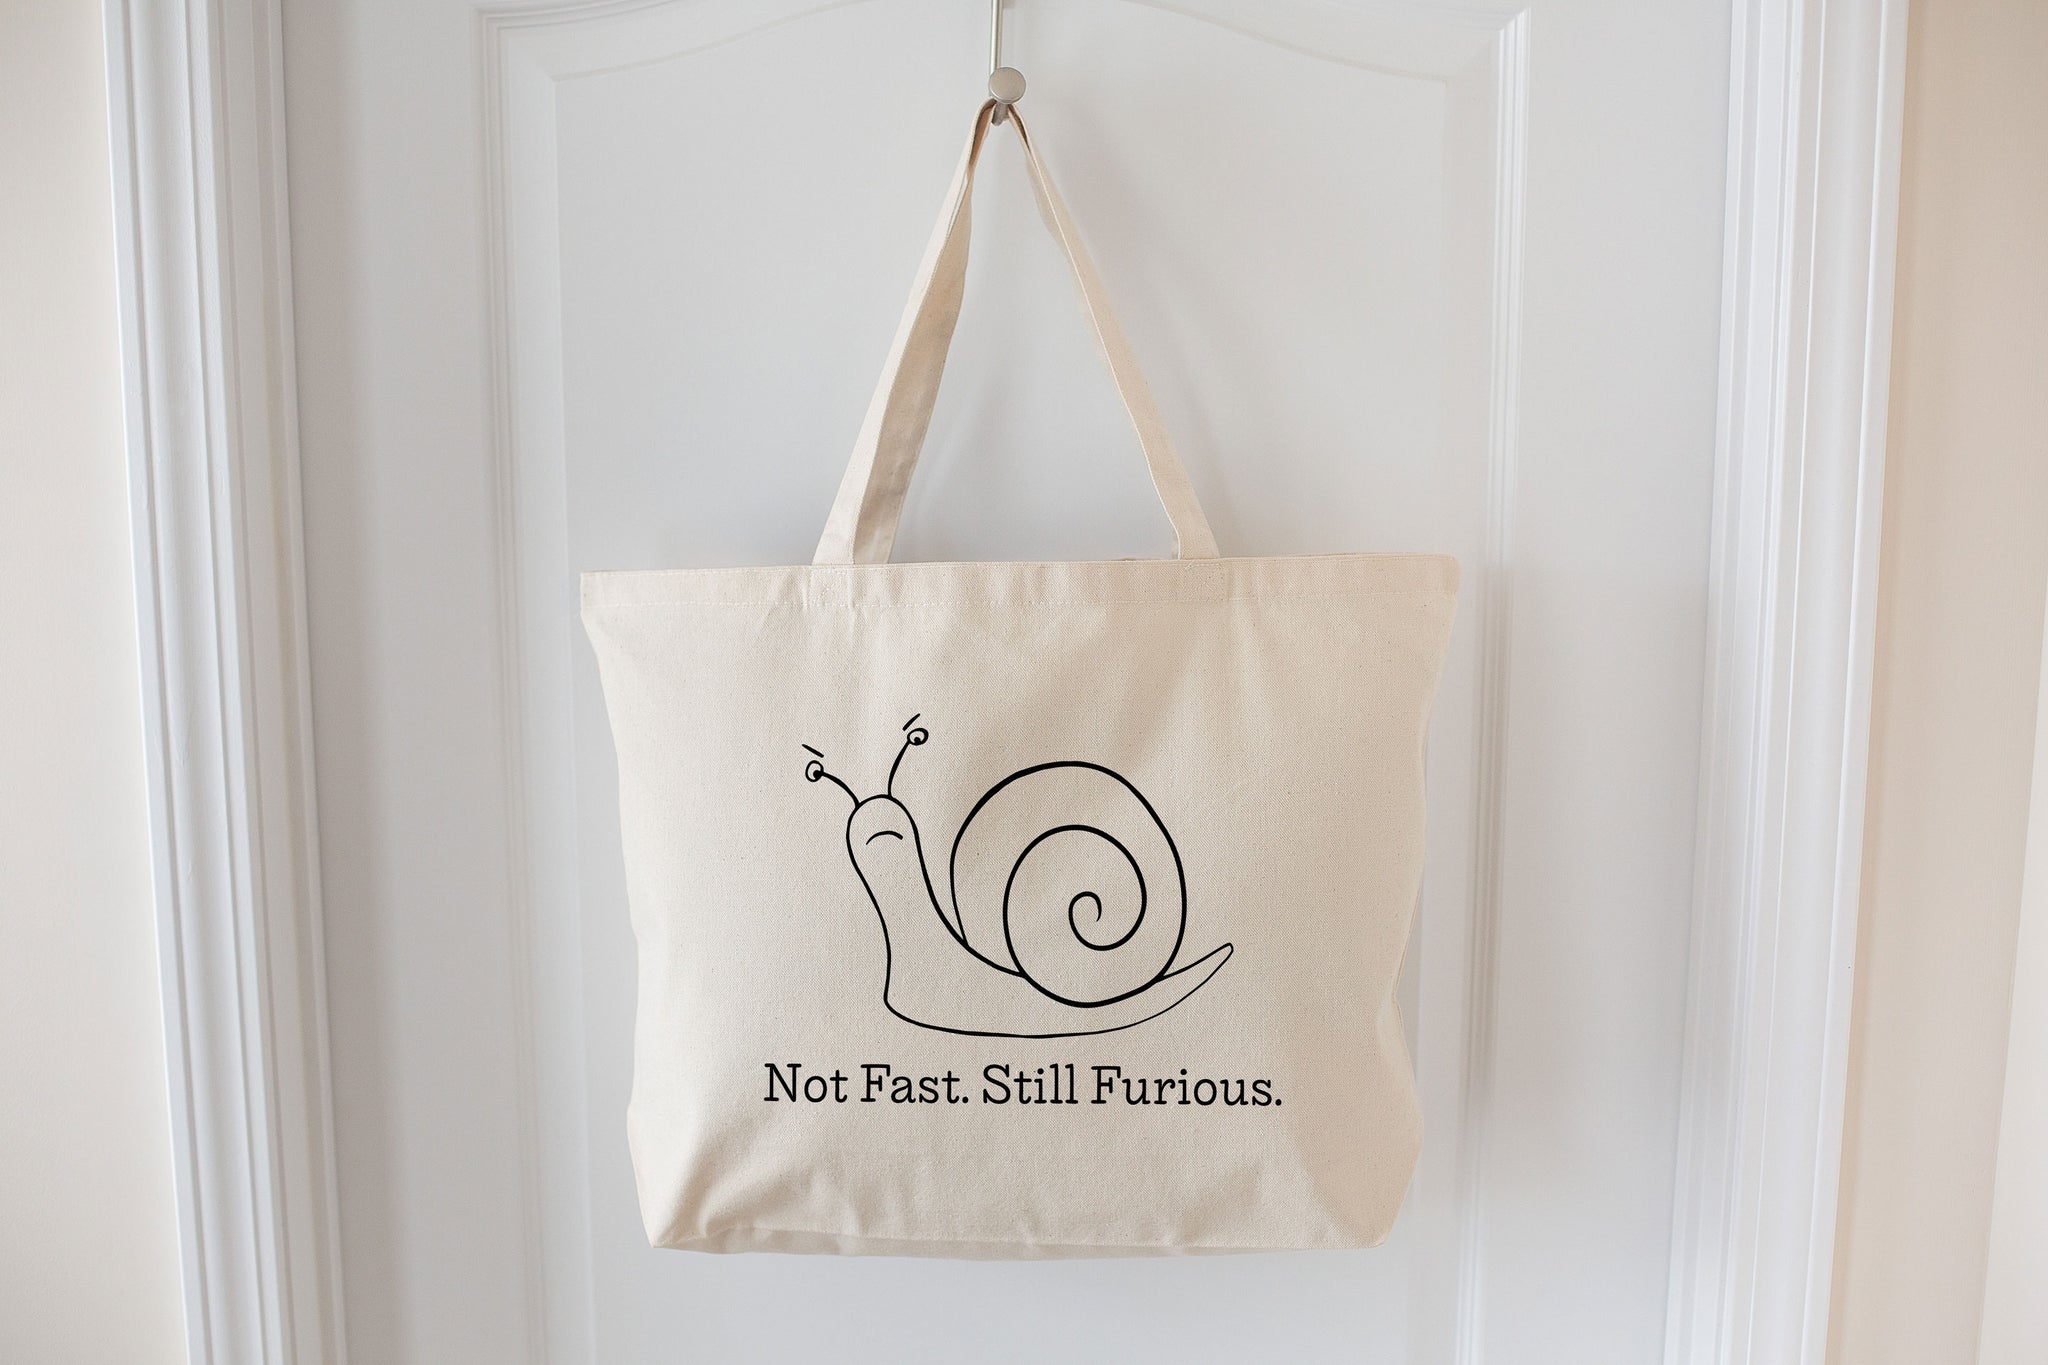 Not Fast Still Furious Snail Large Canvas Tote Bag, Large Heavyweight Canvas Tote, Reuseable Bag